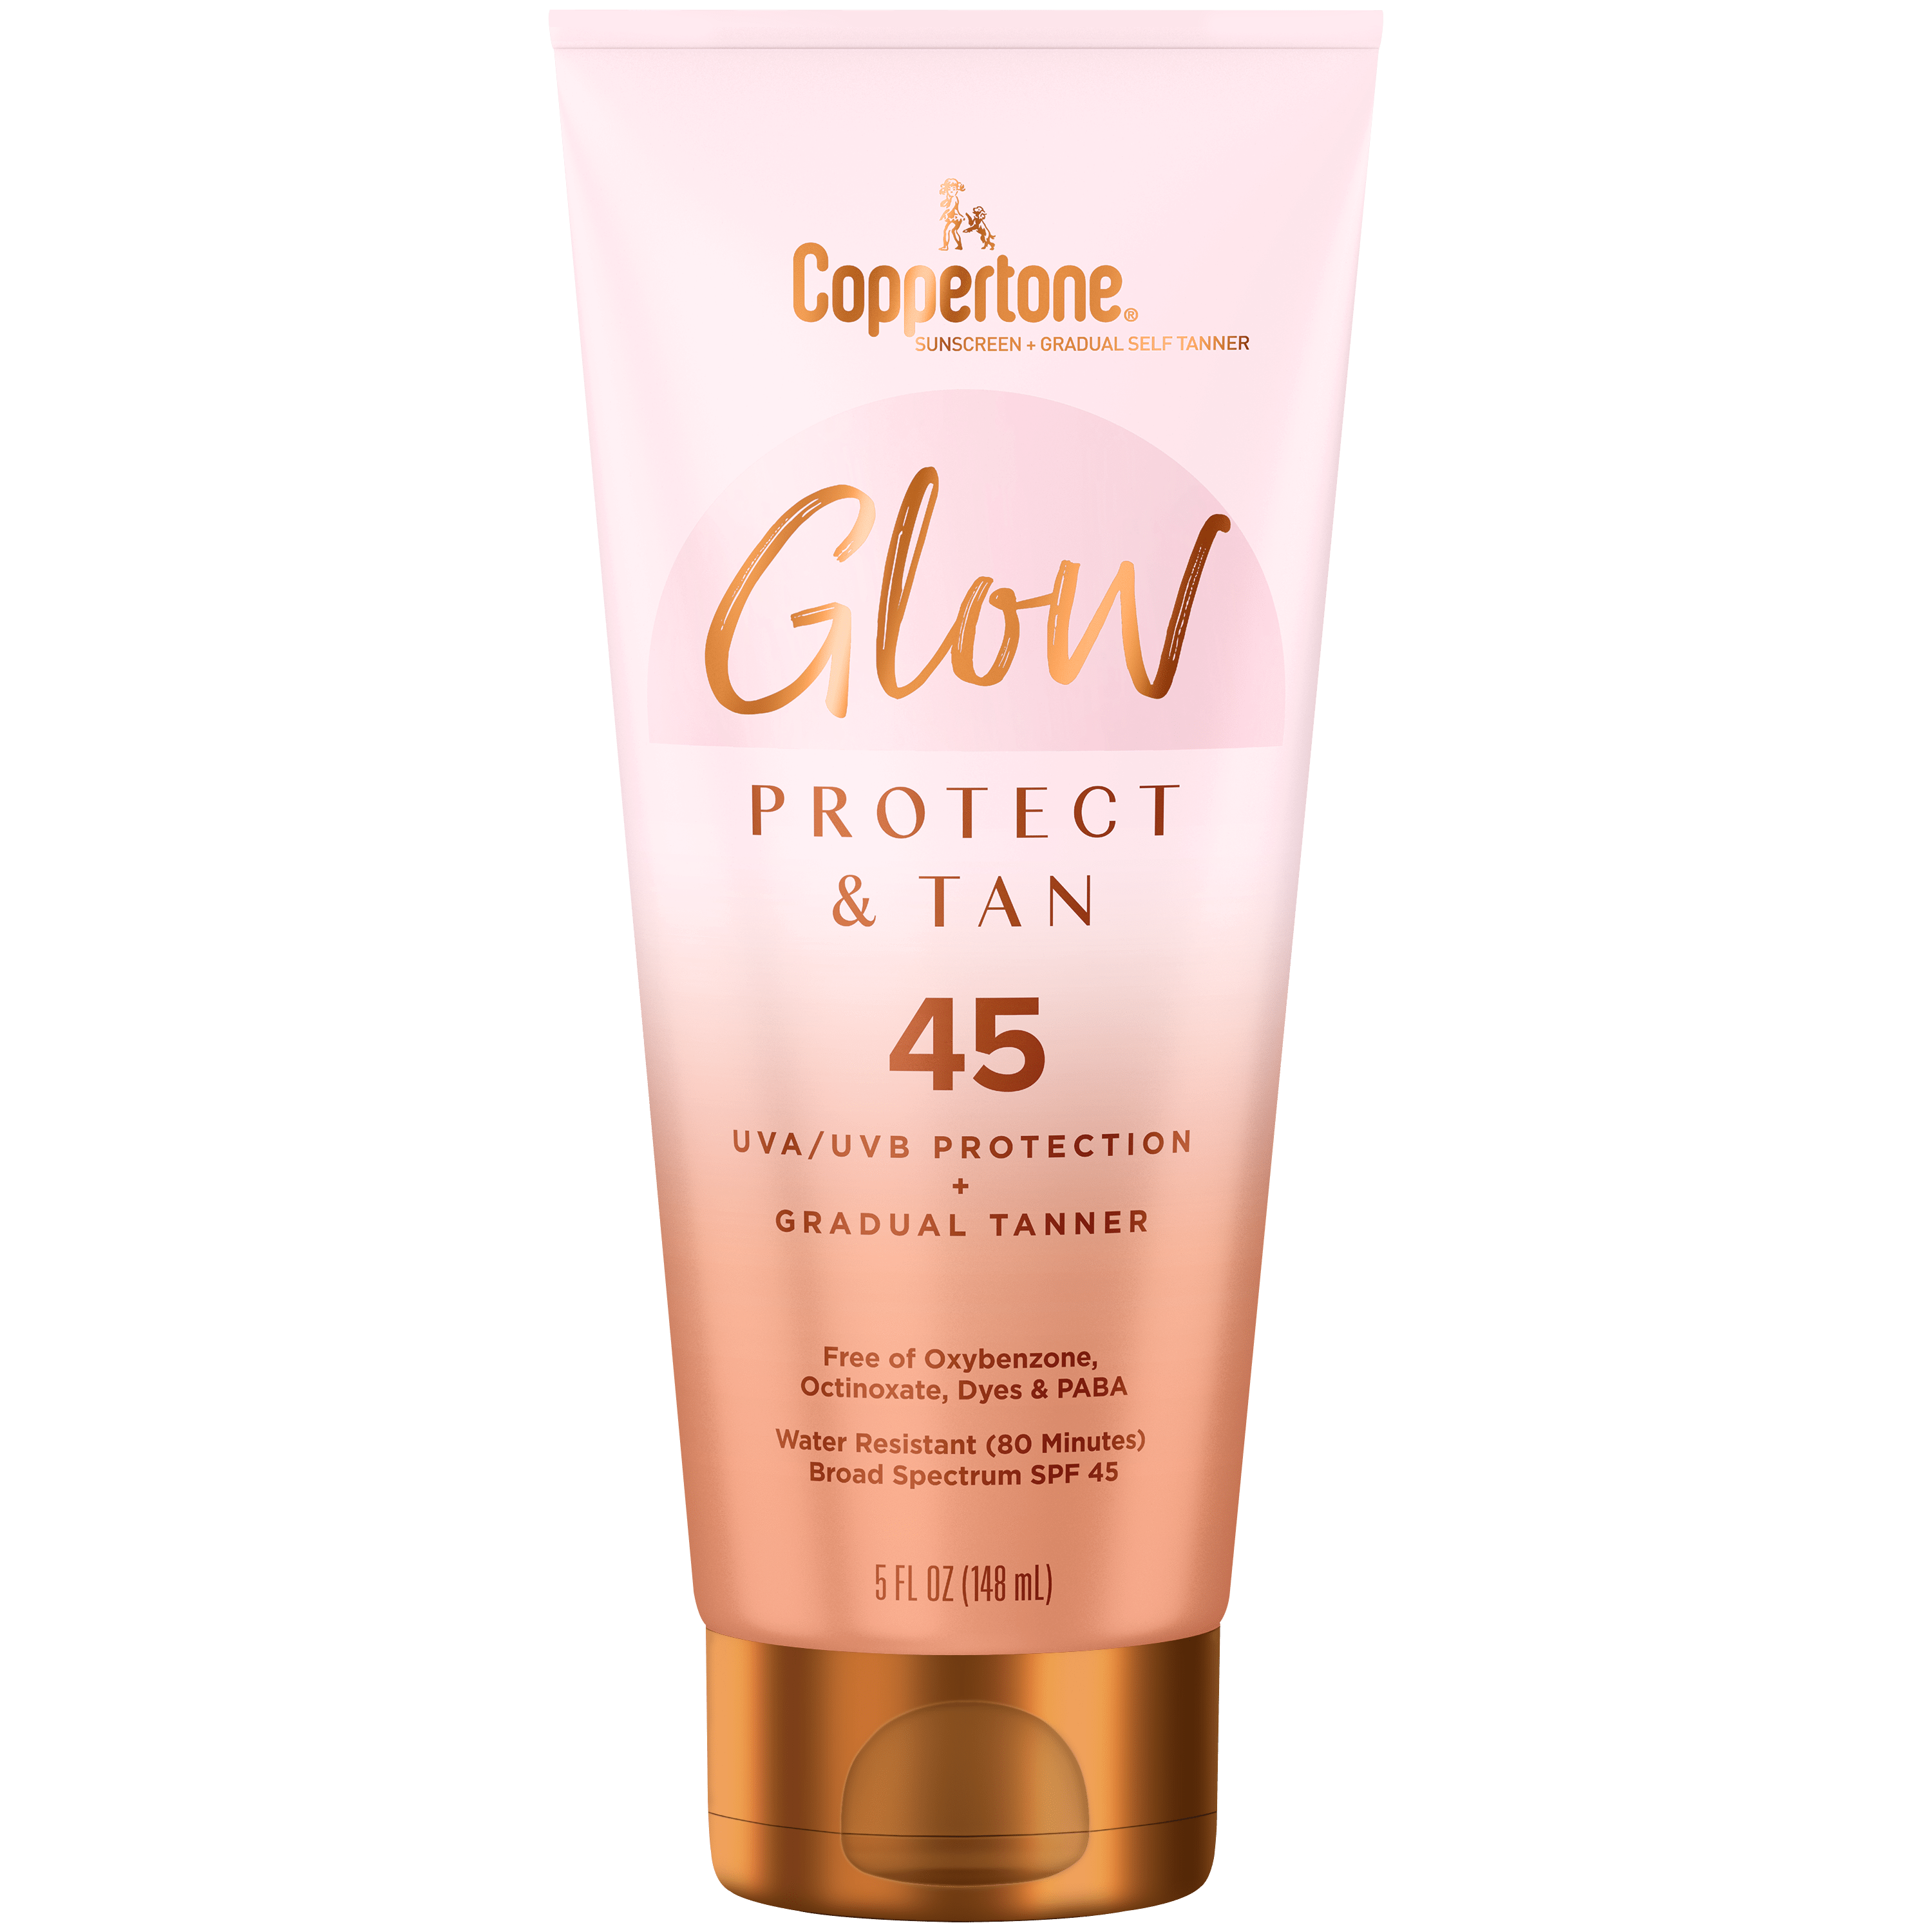 Coppertone Glow Protect and Tan Sunscreen Lotion + Gradual Self Tanner SPF 45